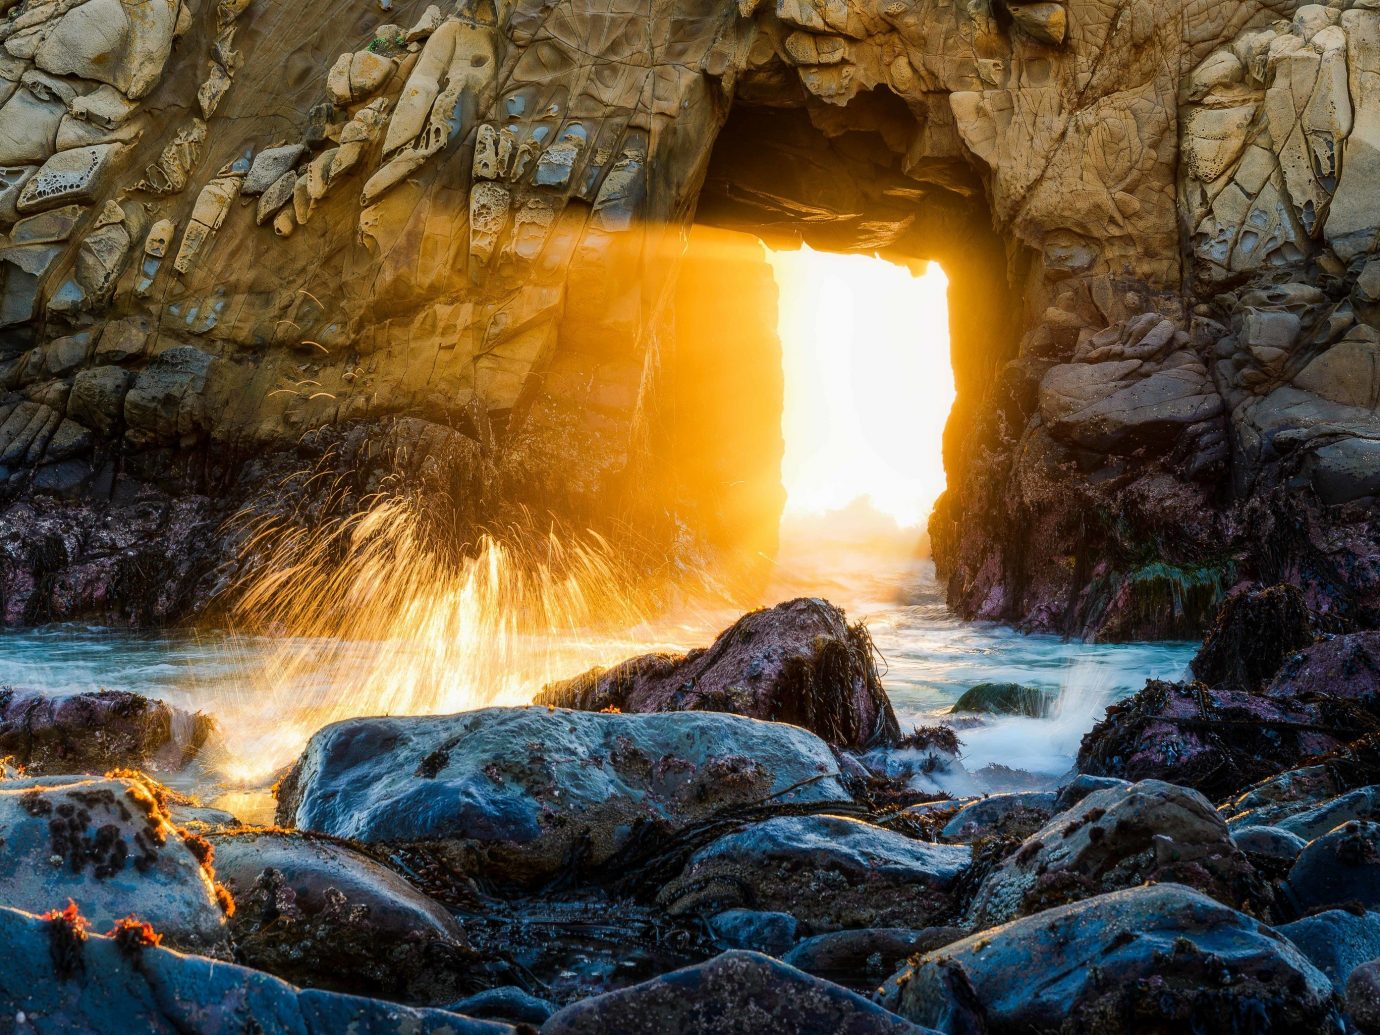 America Beach Trip Ideas West Coast Nature water Waterfall rock water feature formation geological phenomenon sunlight landscape watercourse geology cave stream fluvial landforms of streams computer wallpaper stone